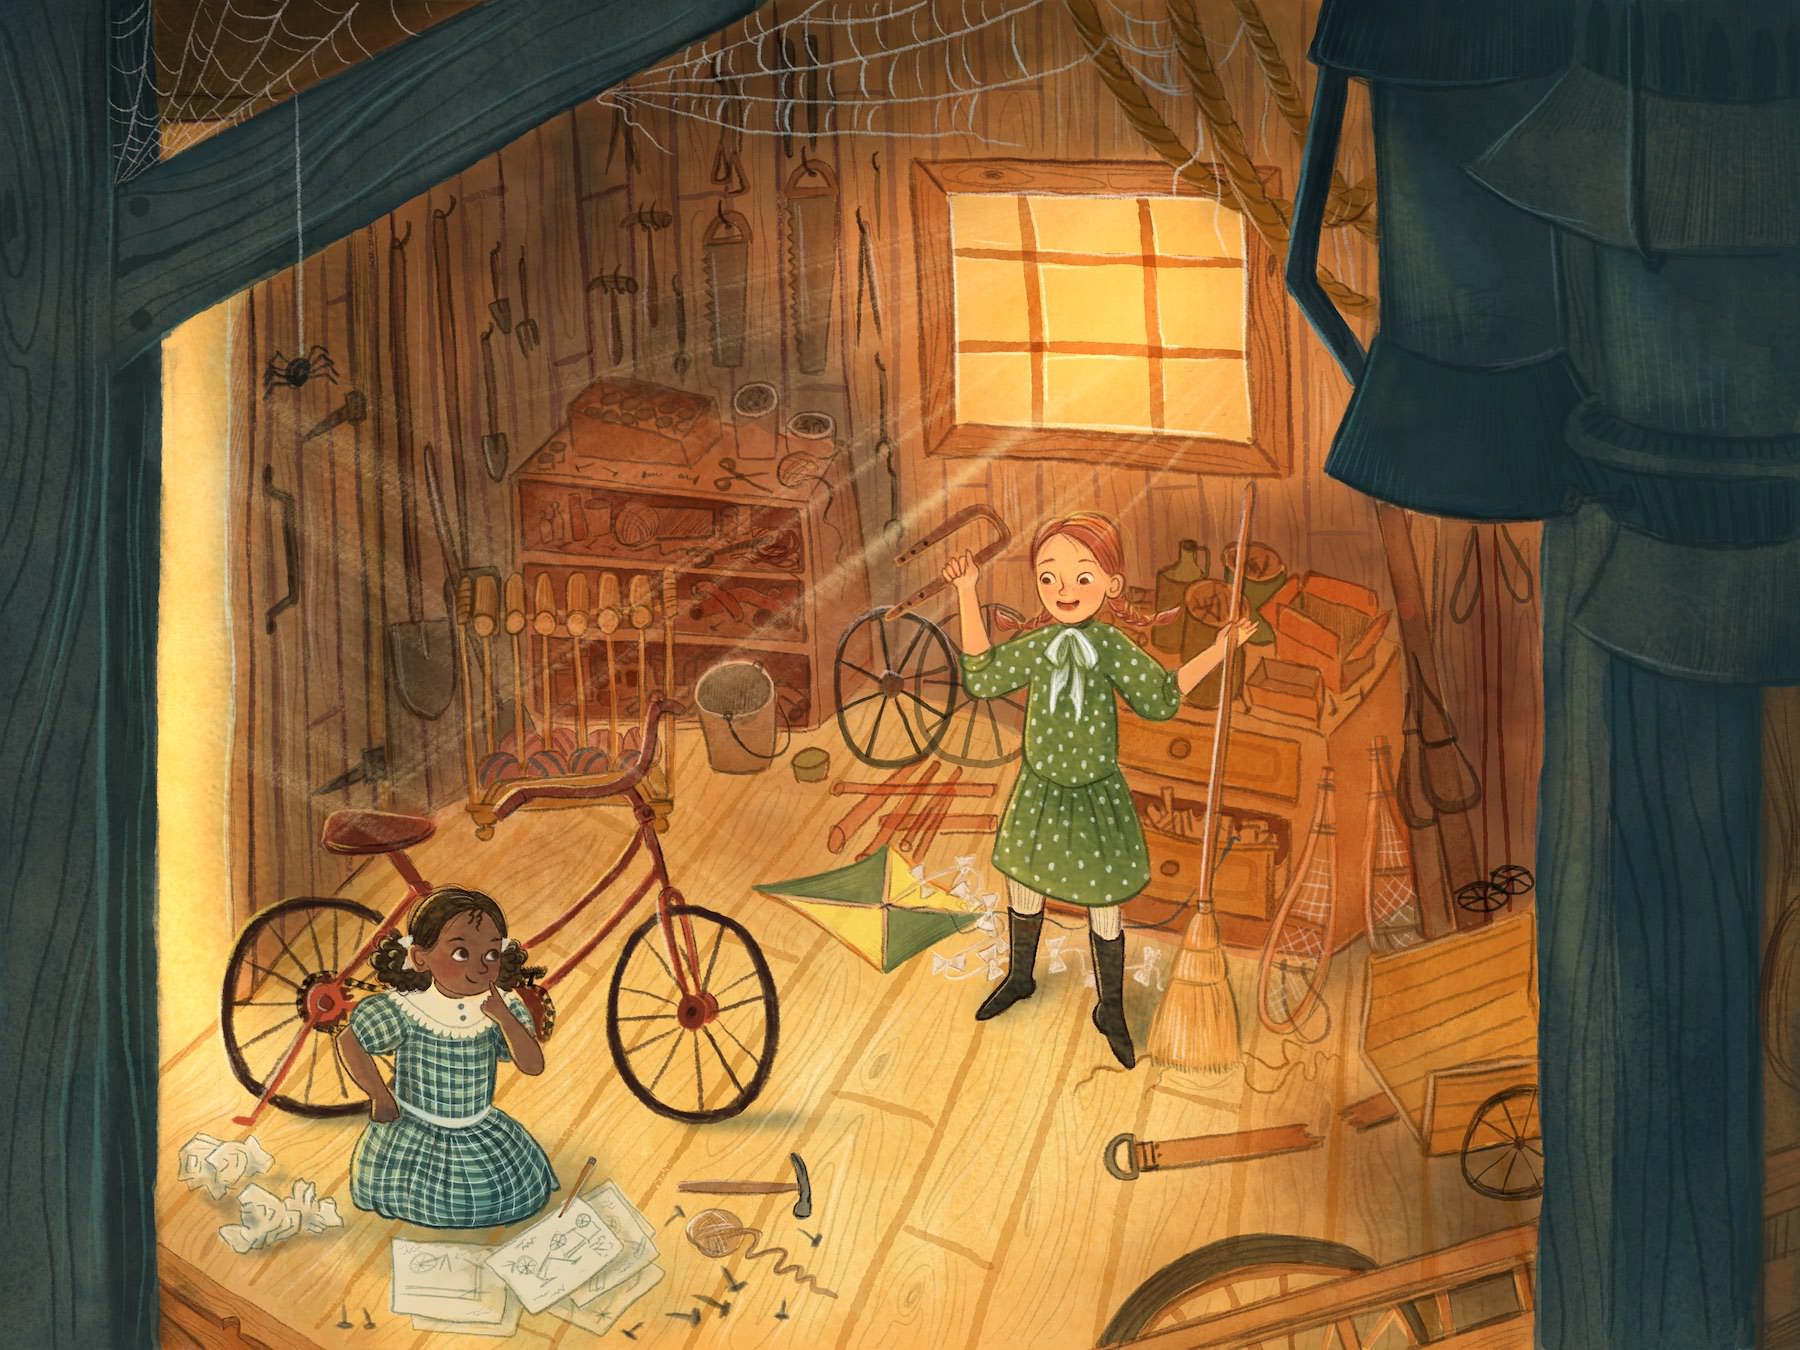 Children's book illustration of two girls in an old barn, cluttered with tools and odd pieces of carts, wagons, and building materials. The red haired girl is wearing a green dress and is holding a piece of pipe in one hand and a broom in the other, and looking at the other girl, her mouth open in speech. The other girl is black, and is wearing a blue plaid dress. She is sitting on the floor with paper covered in drawings in front of her. She has a hand to her cheek like she's thinking, and is looking at the red haired girl with a pleased expression on her face.